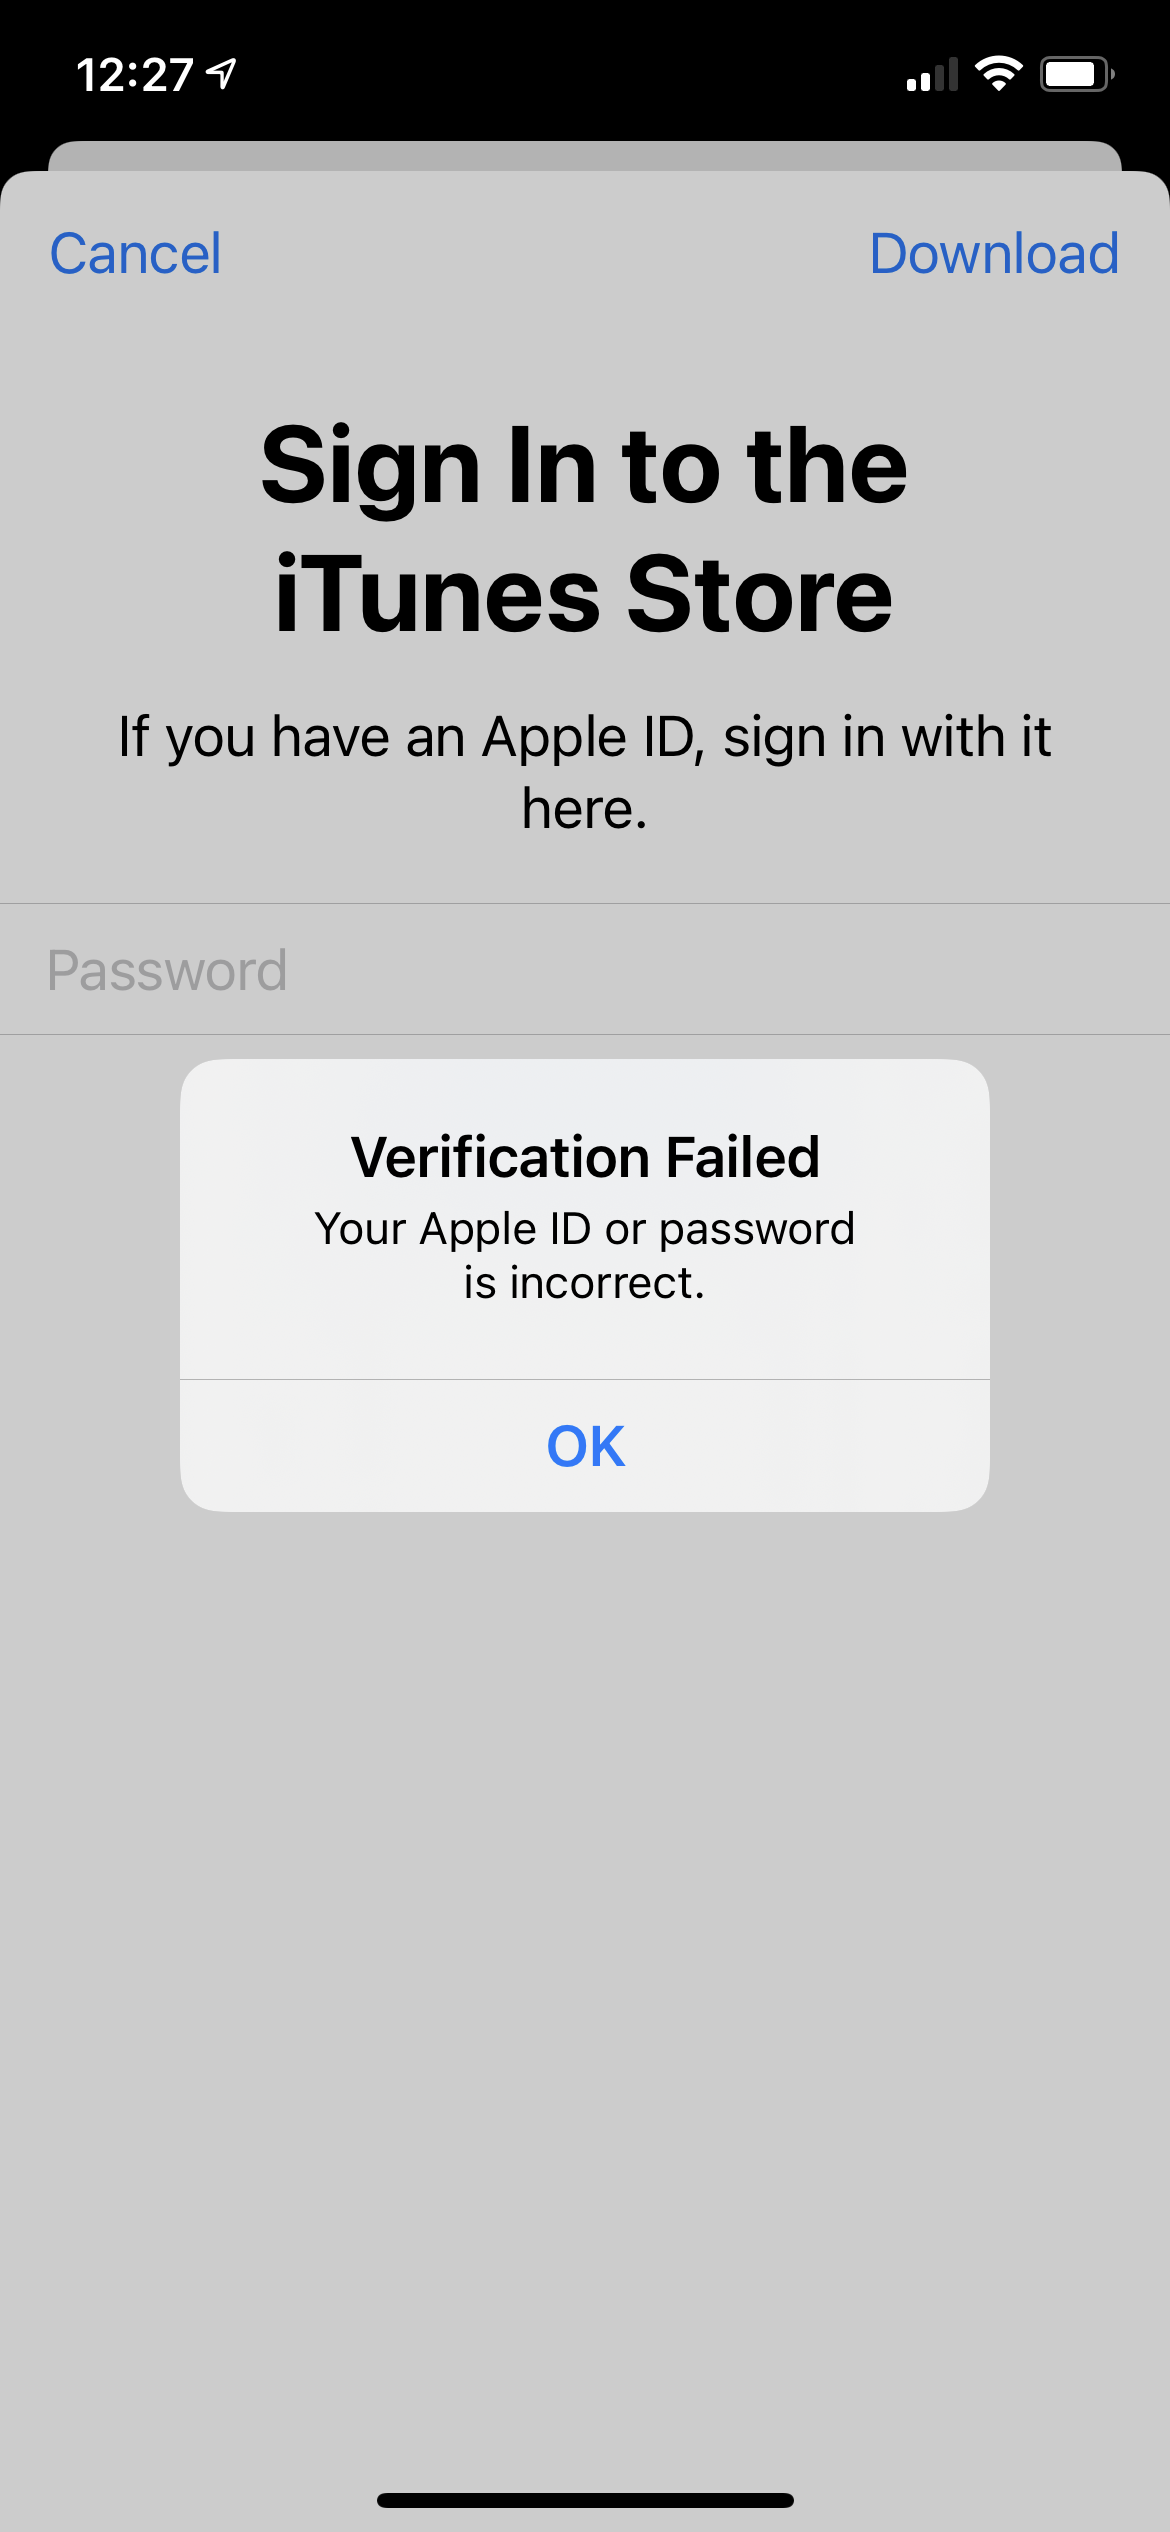 My Apple ID or password is incorrect - Apple Community